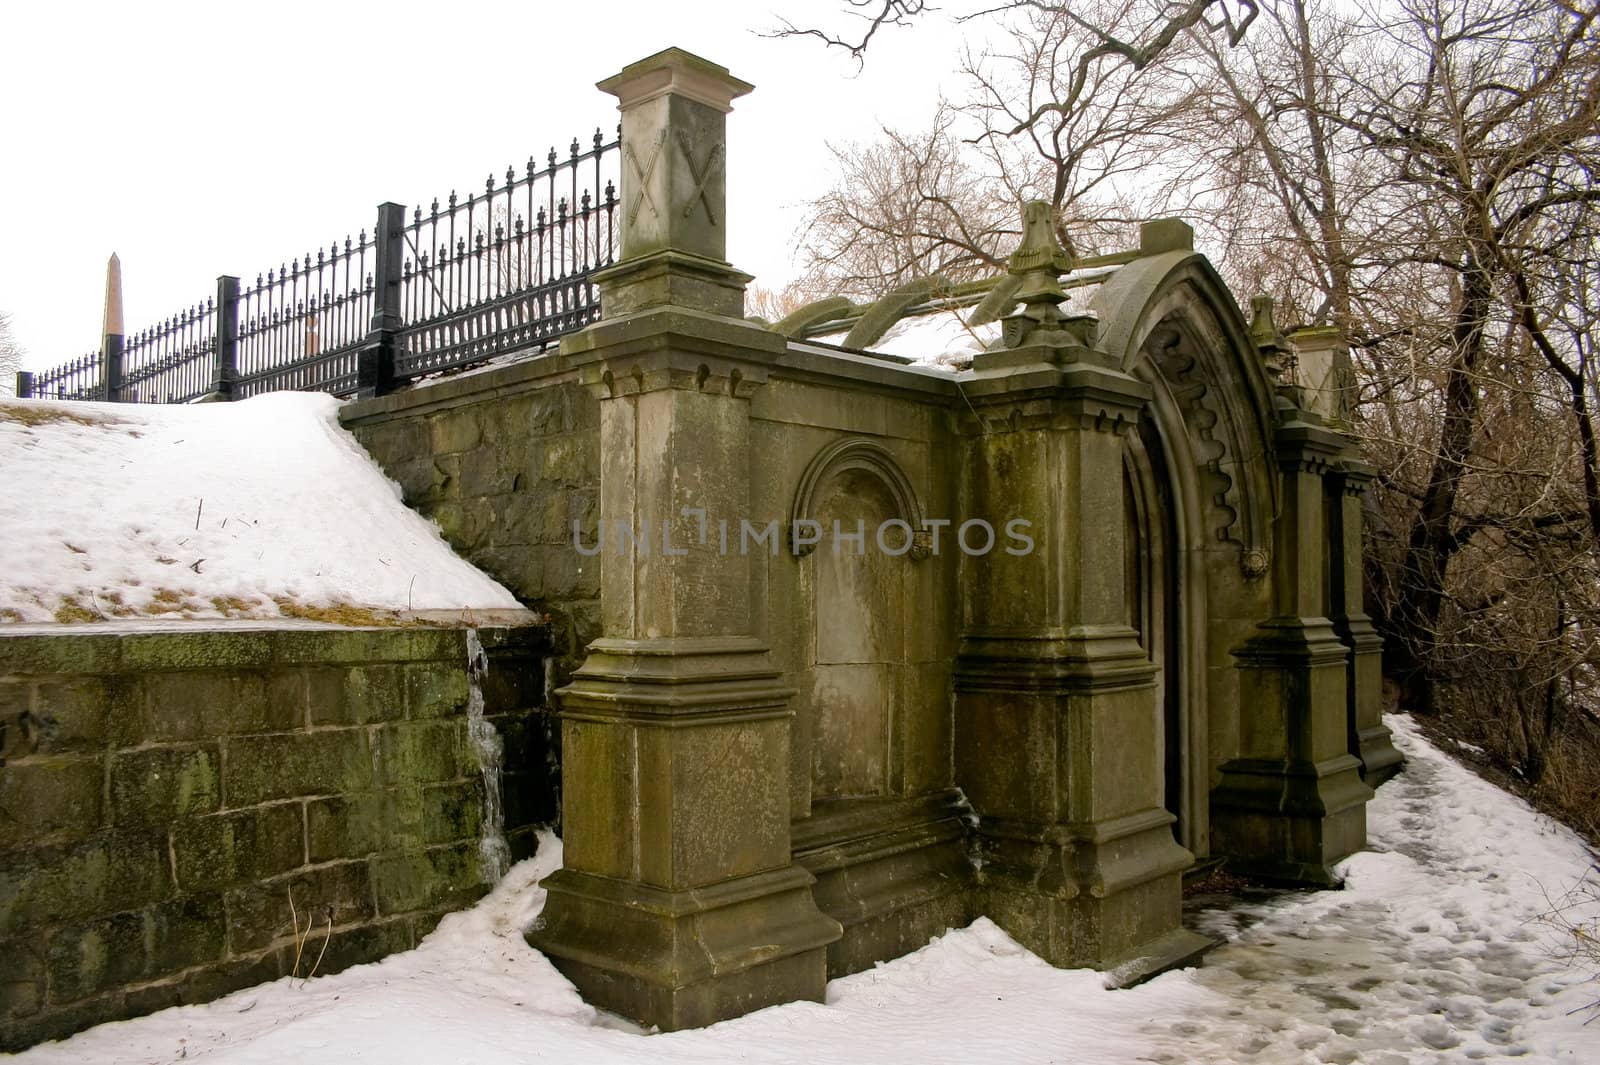 Mausoleum in Winter by micahbowerbank